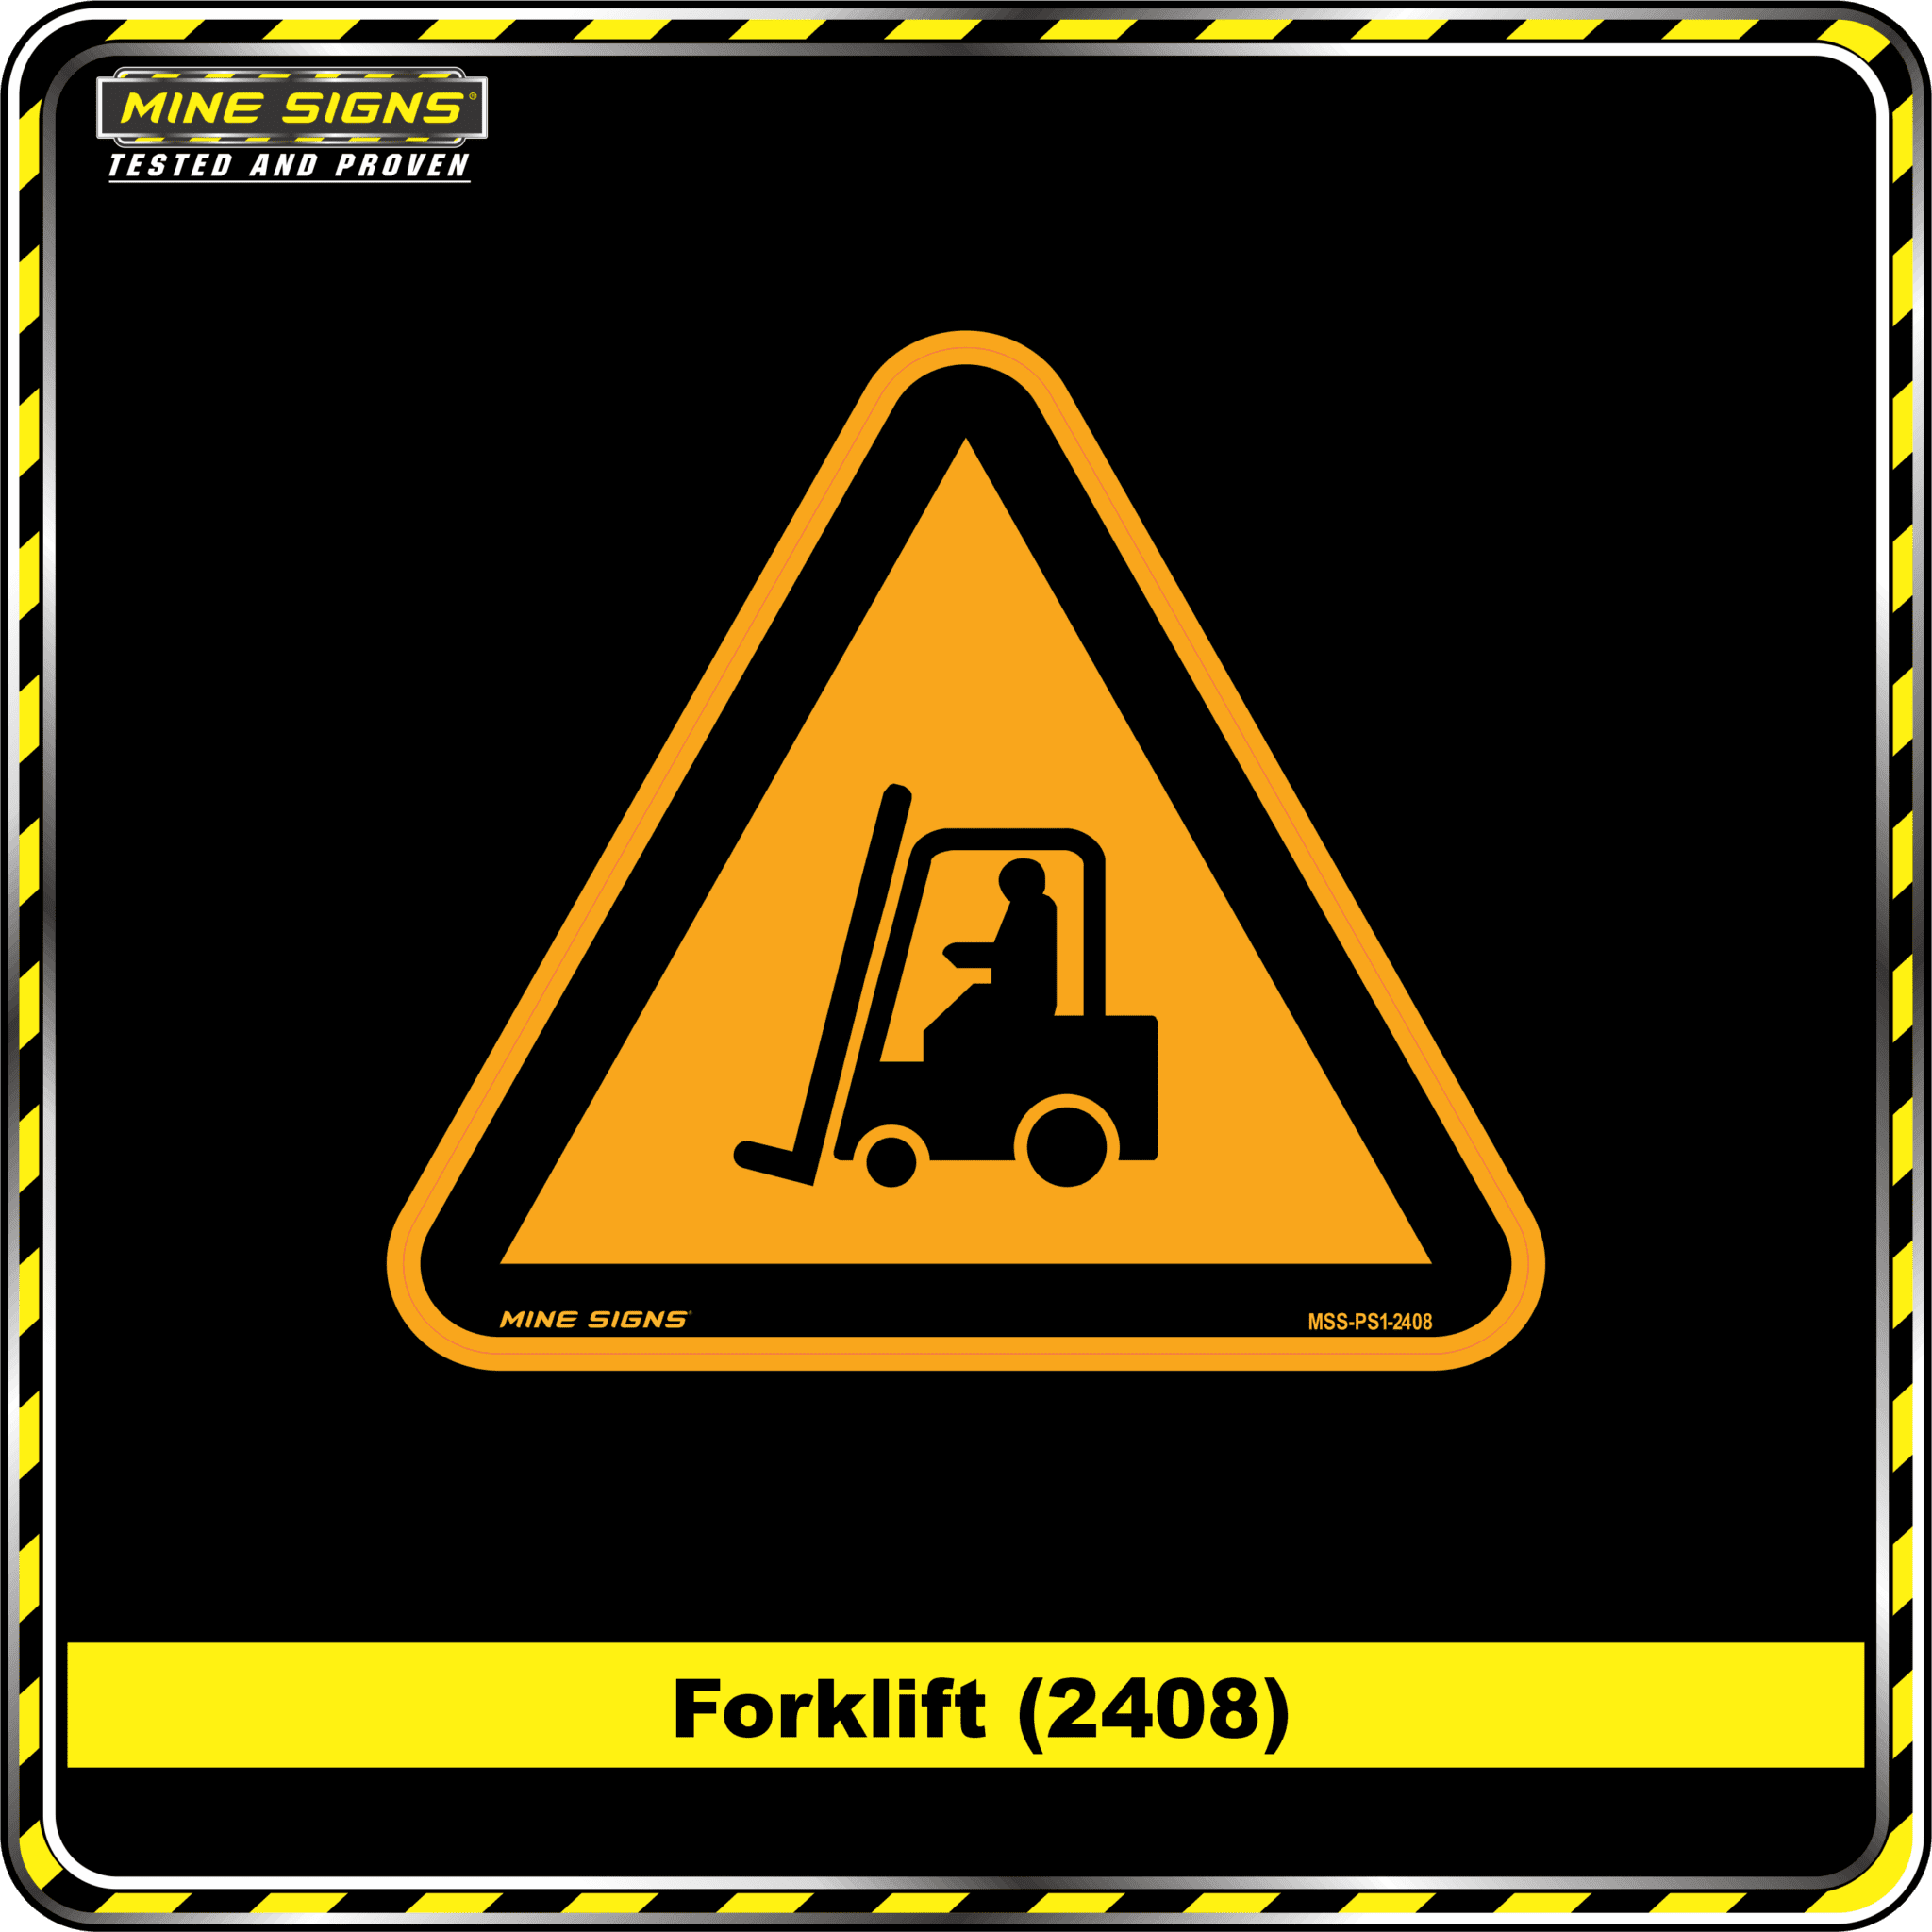 MS - Product Background - Safety Signs - Forklift 2408